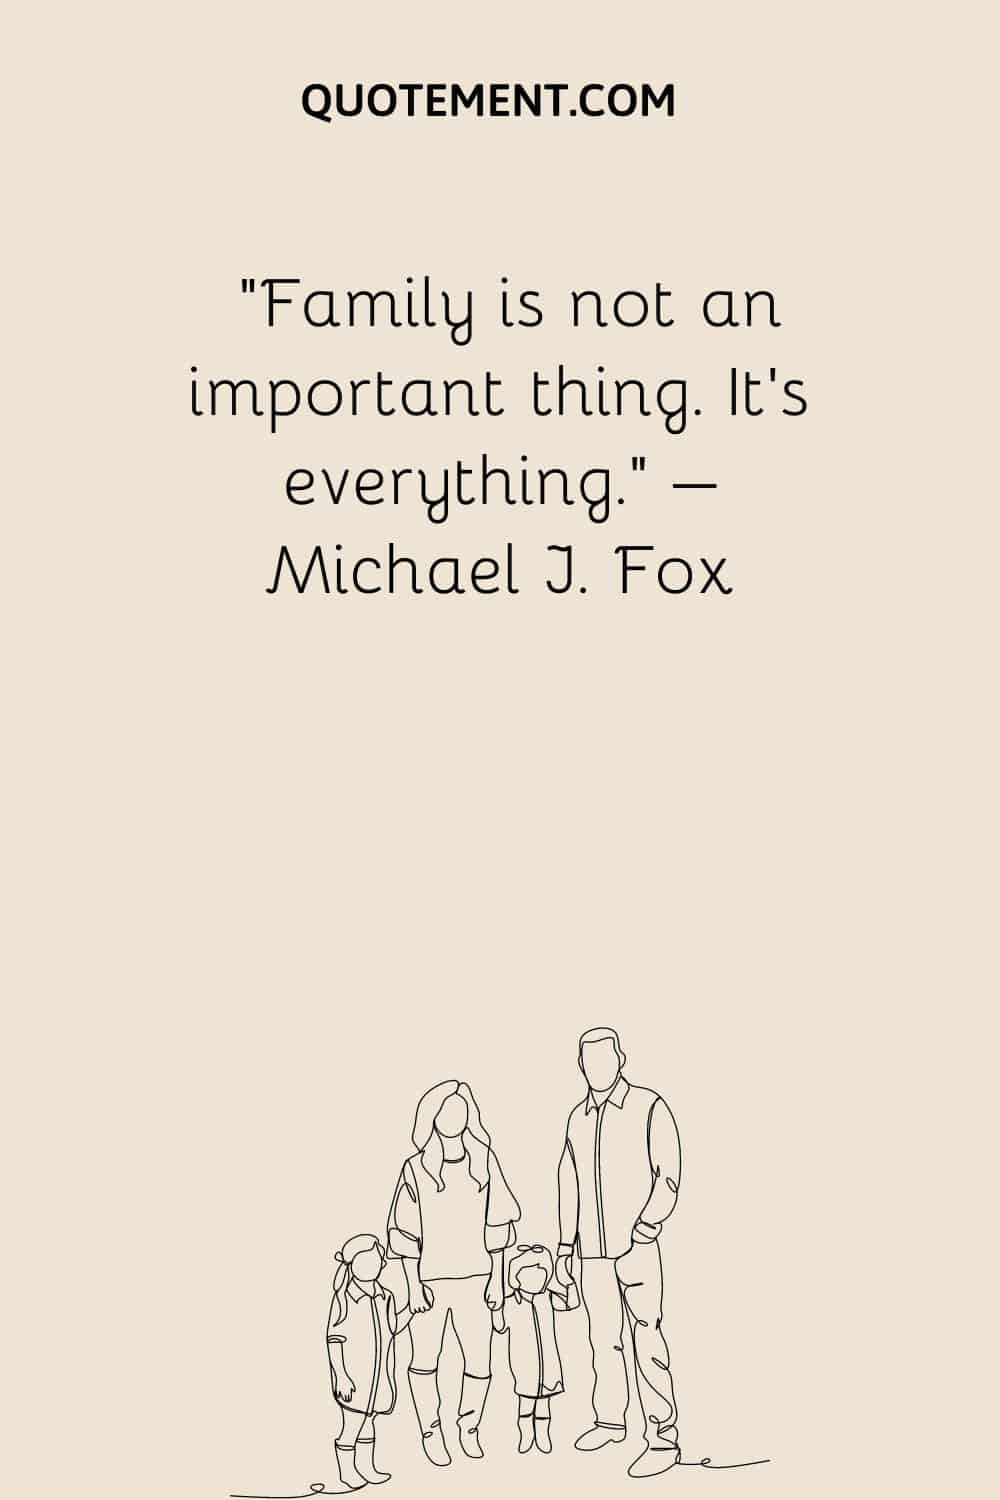 Family is not an important thing